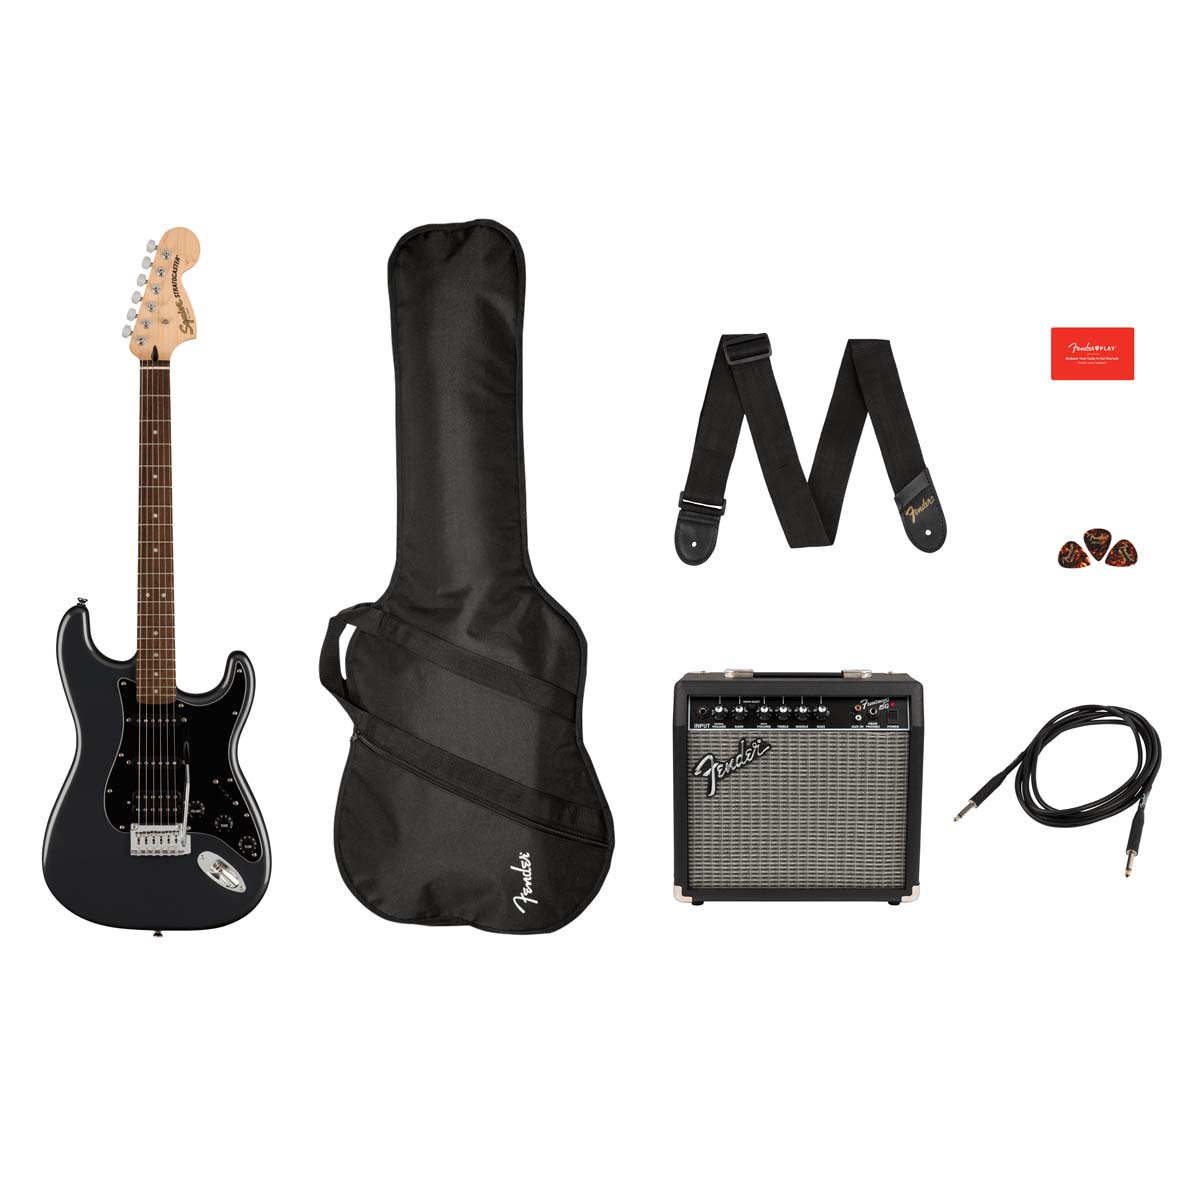 Fender Squier Affinity Series Stratocaster HSS Electric Guitar Pack Charcoal Frost Metallic w/ 15w Amp - 0372821369